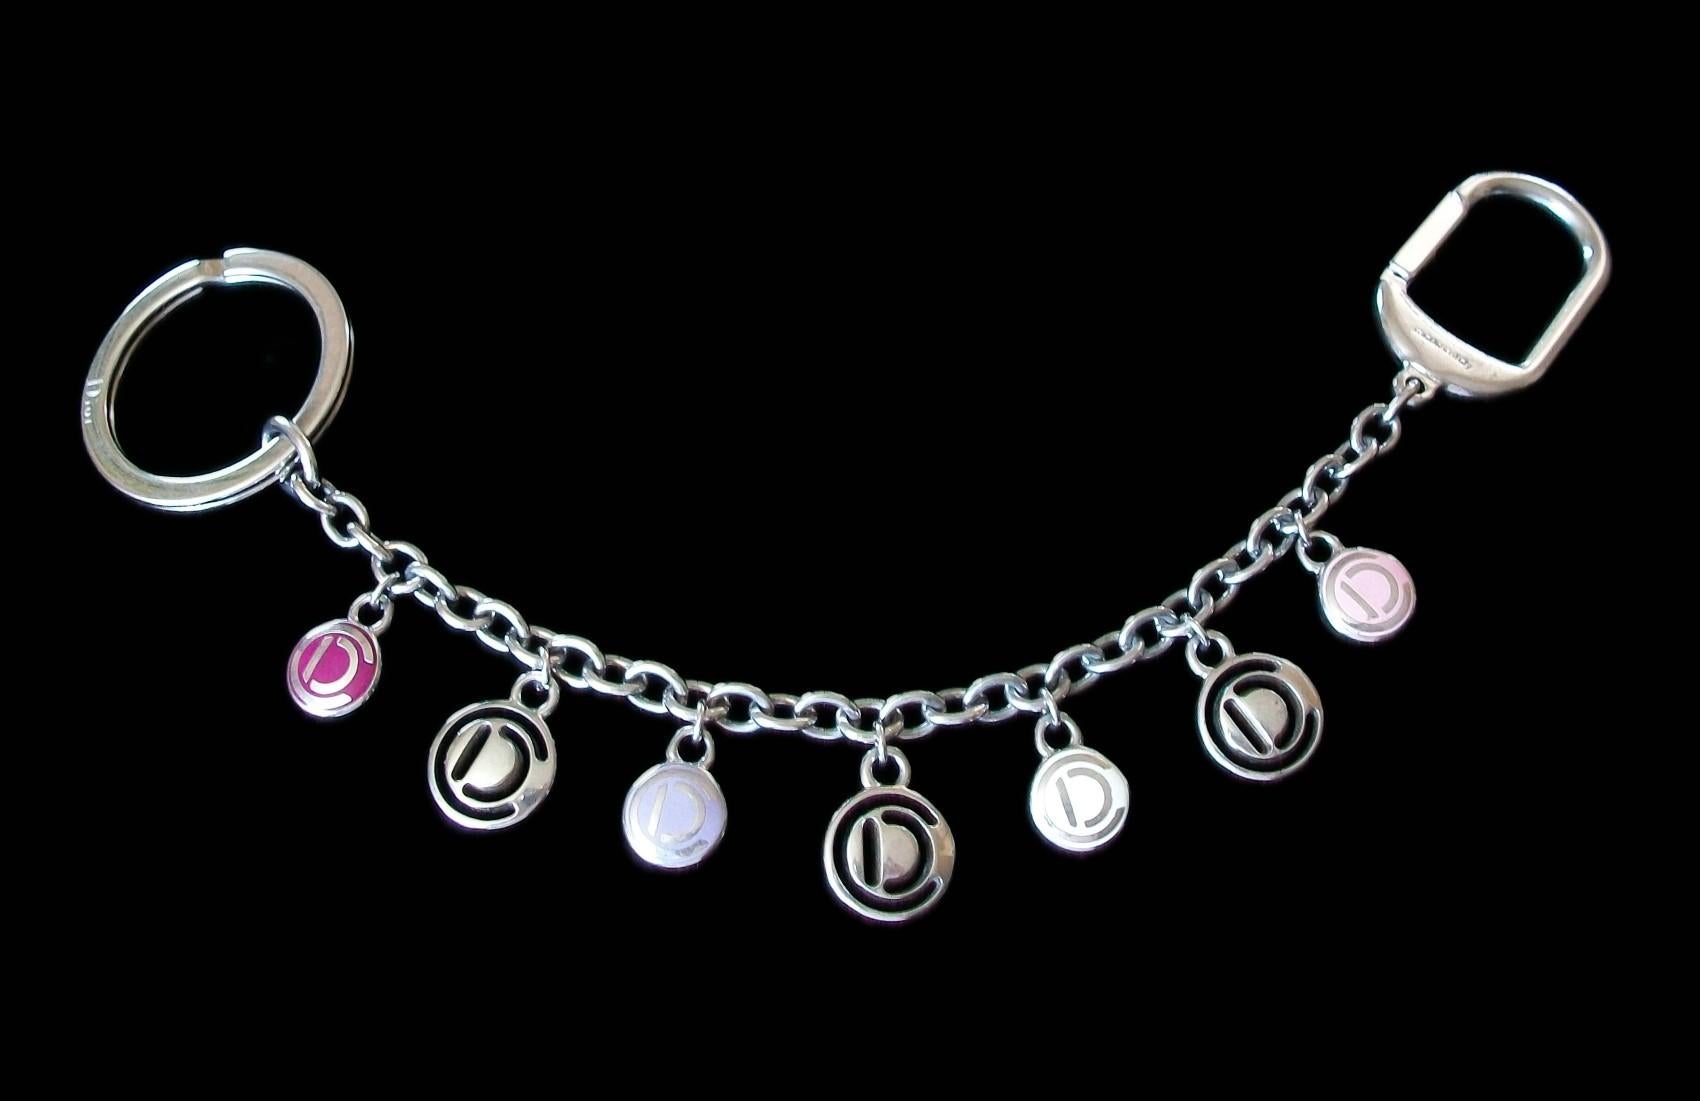 CHRISTIAN DIOR - Elegant designer white metal key chain with multi-color enamel bag charms - fine quality - each charm with the 'CD' logo - three charms pierced metal - four individual charms in red, lavender, white and pink enamel - signed 'Dior'